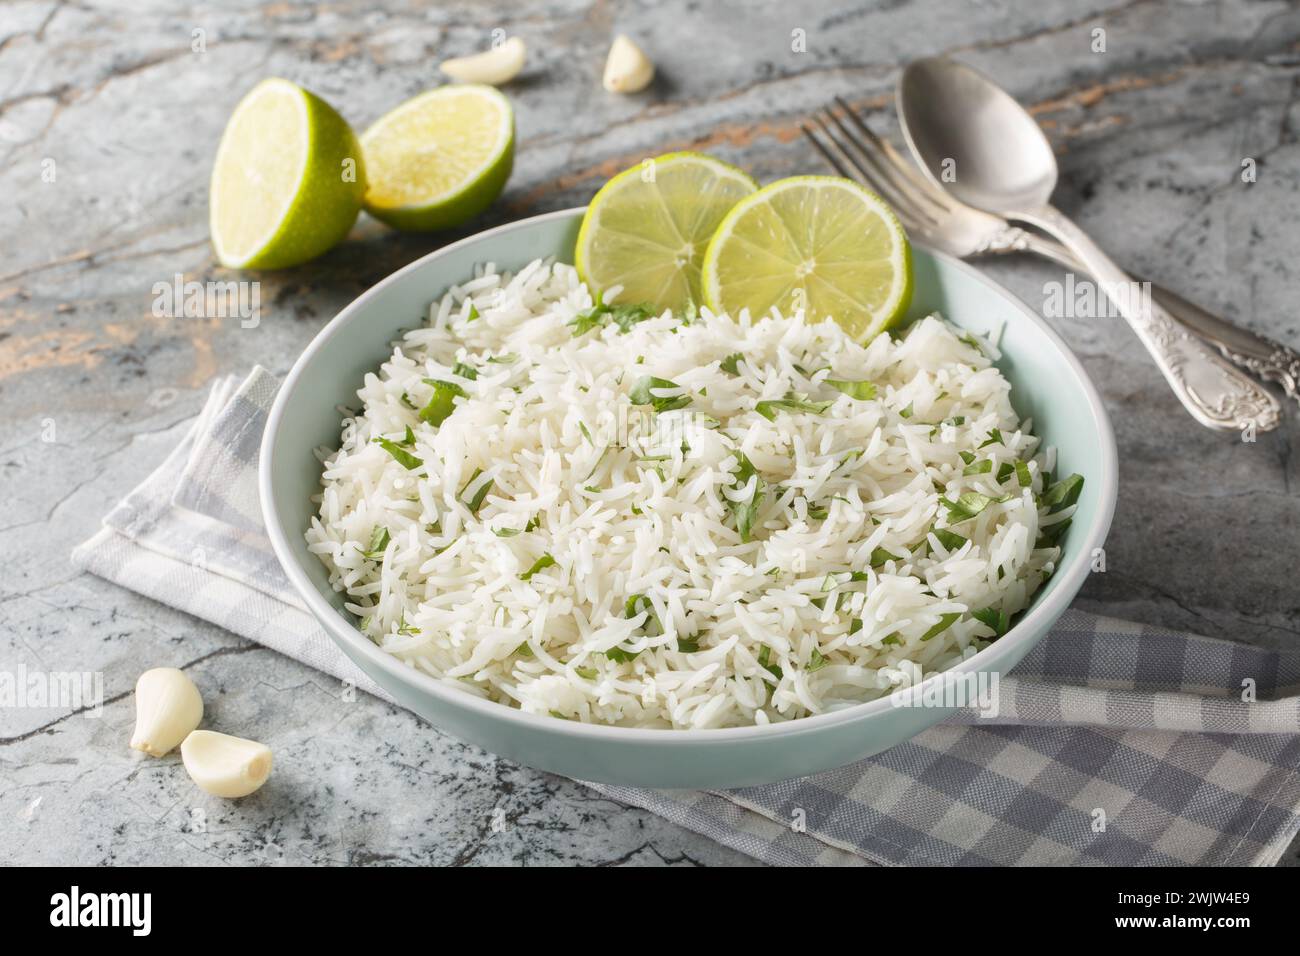 Delicious rice with garlic, cilantro, lime and zest close-up in a bowl on the table. Horizontal Stock Photo